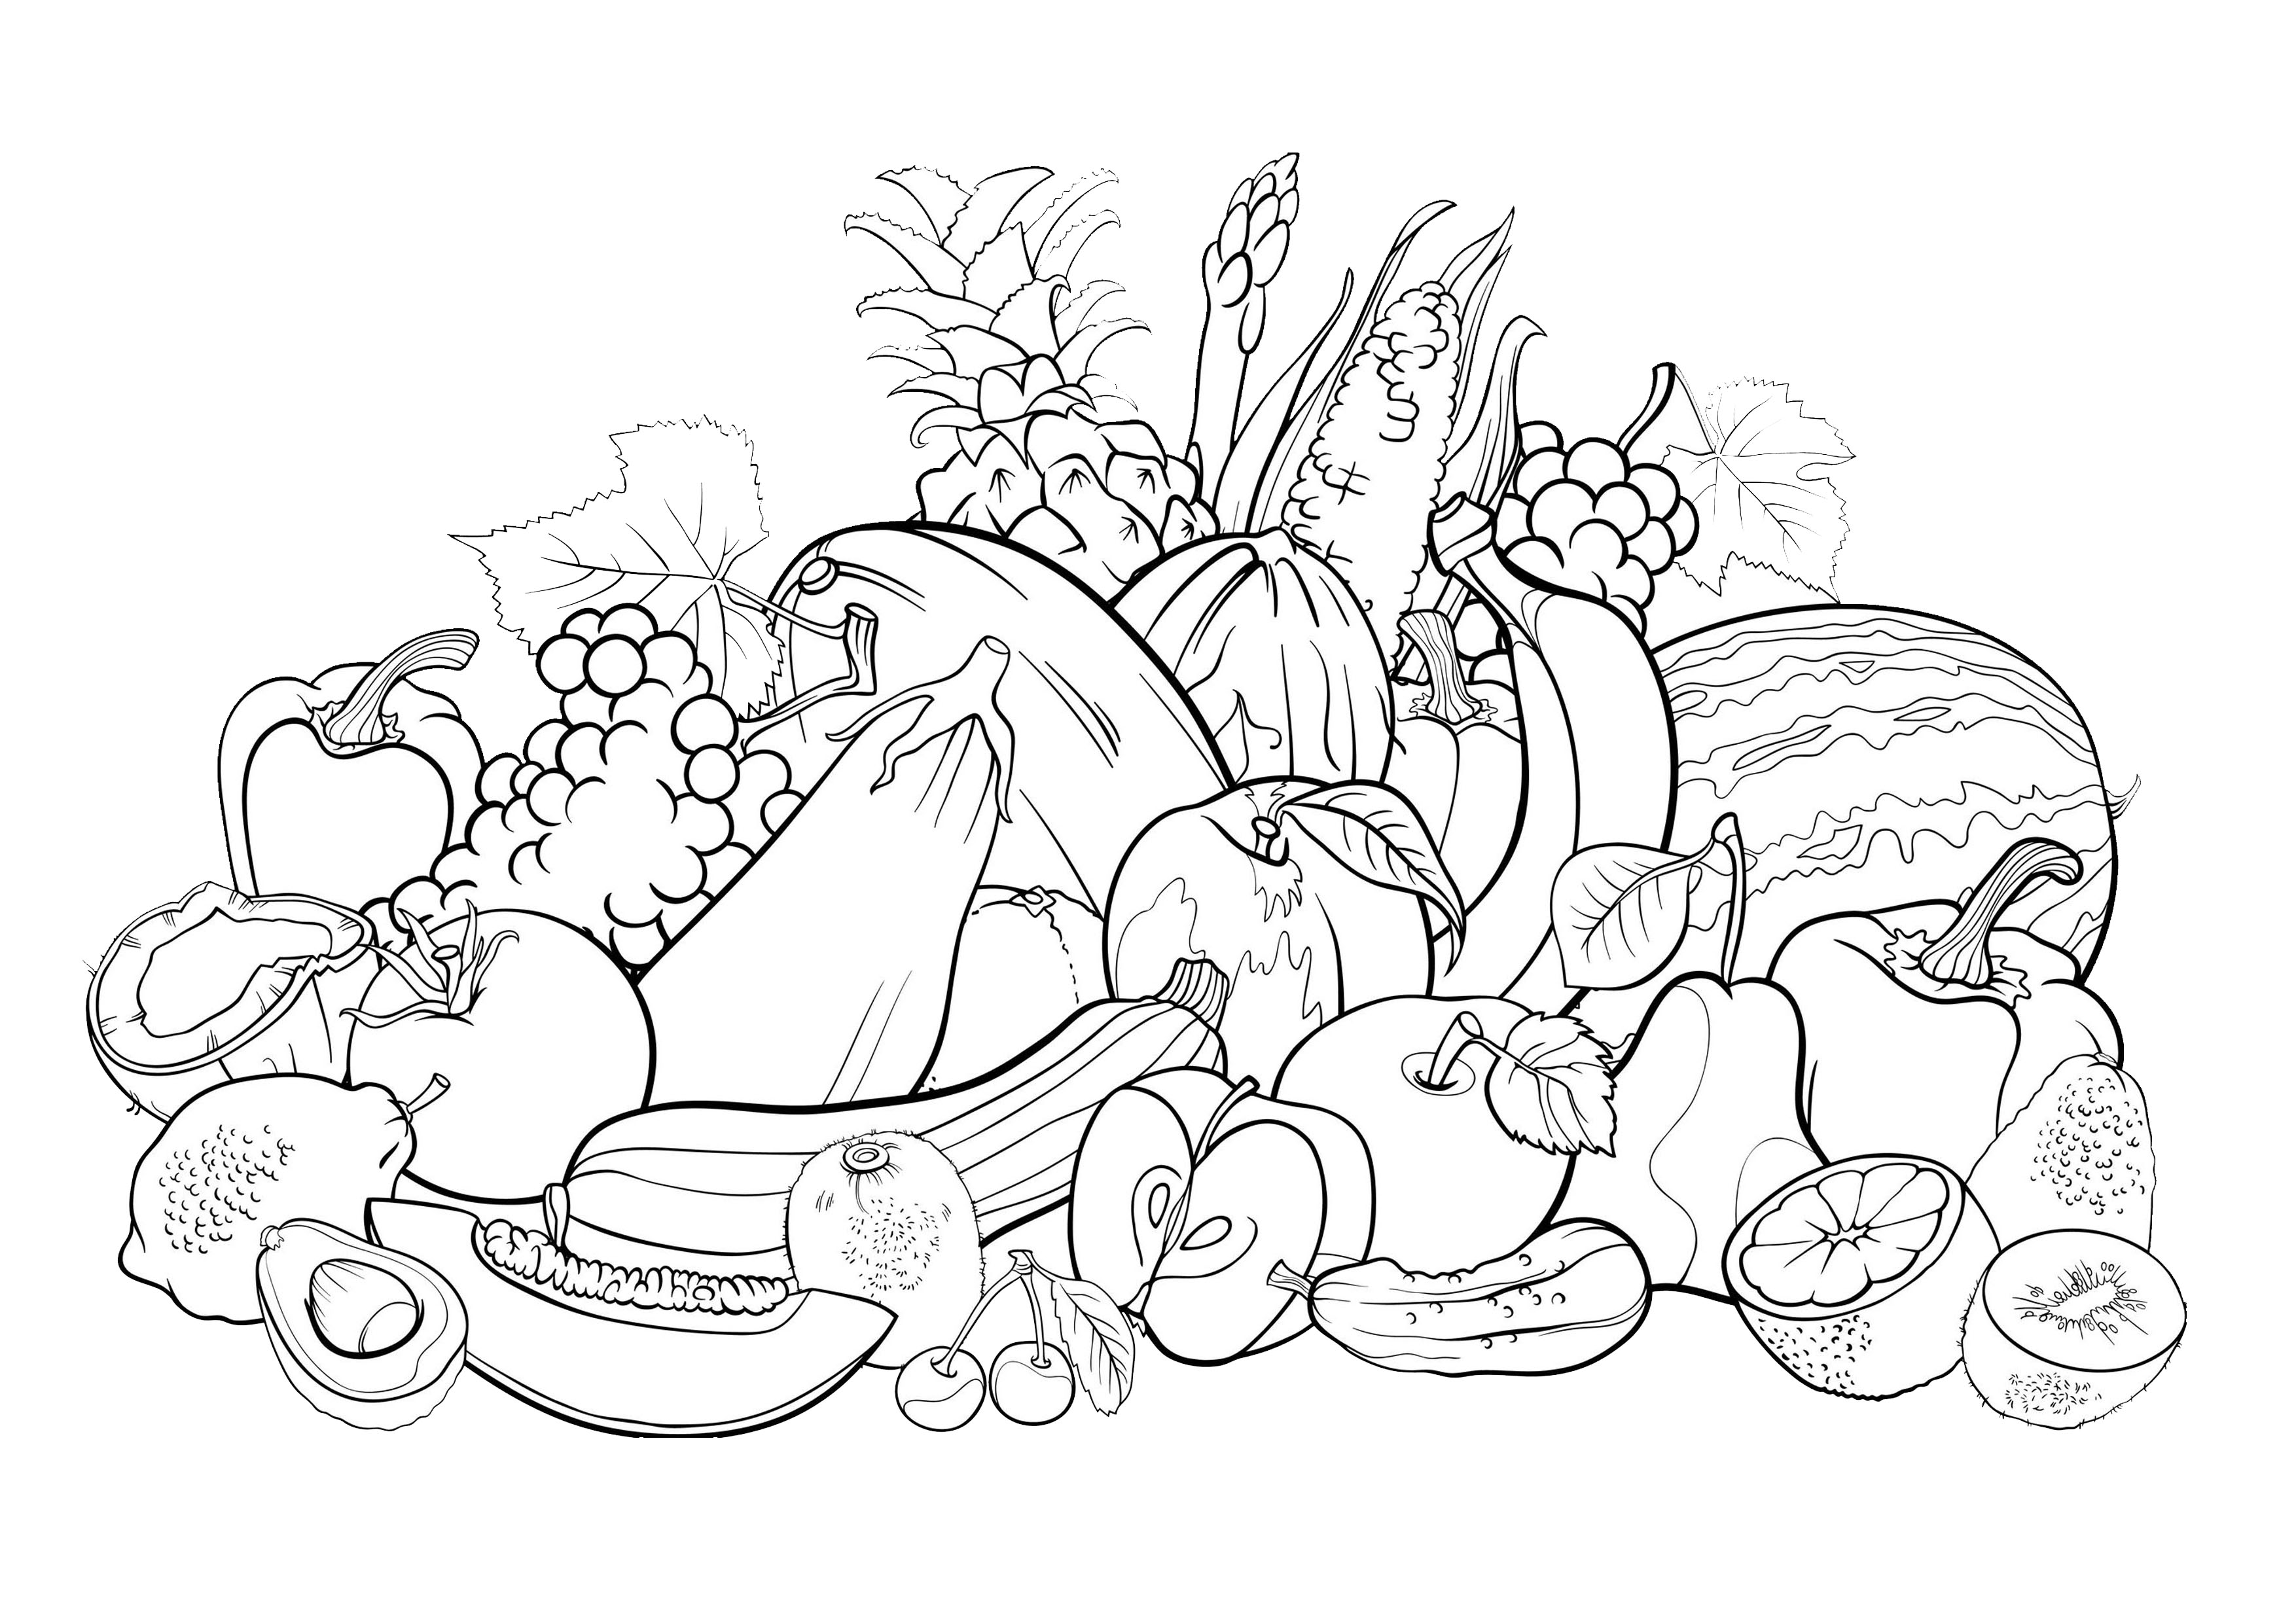 Fruit salad - New Free & exclusive Coloring pages for adults - Just Color